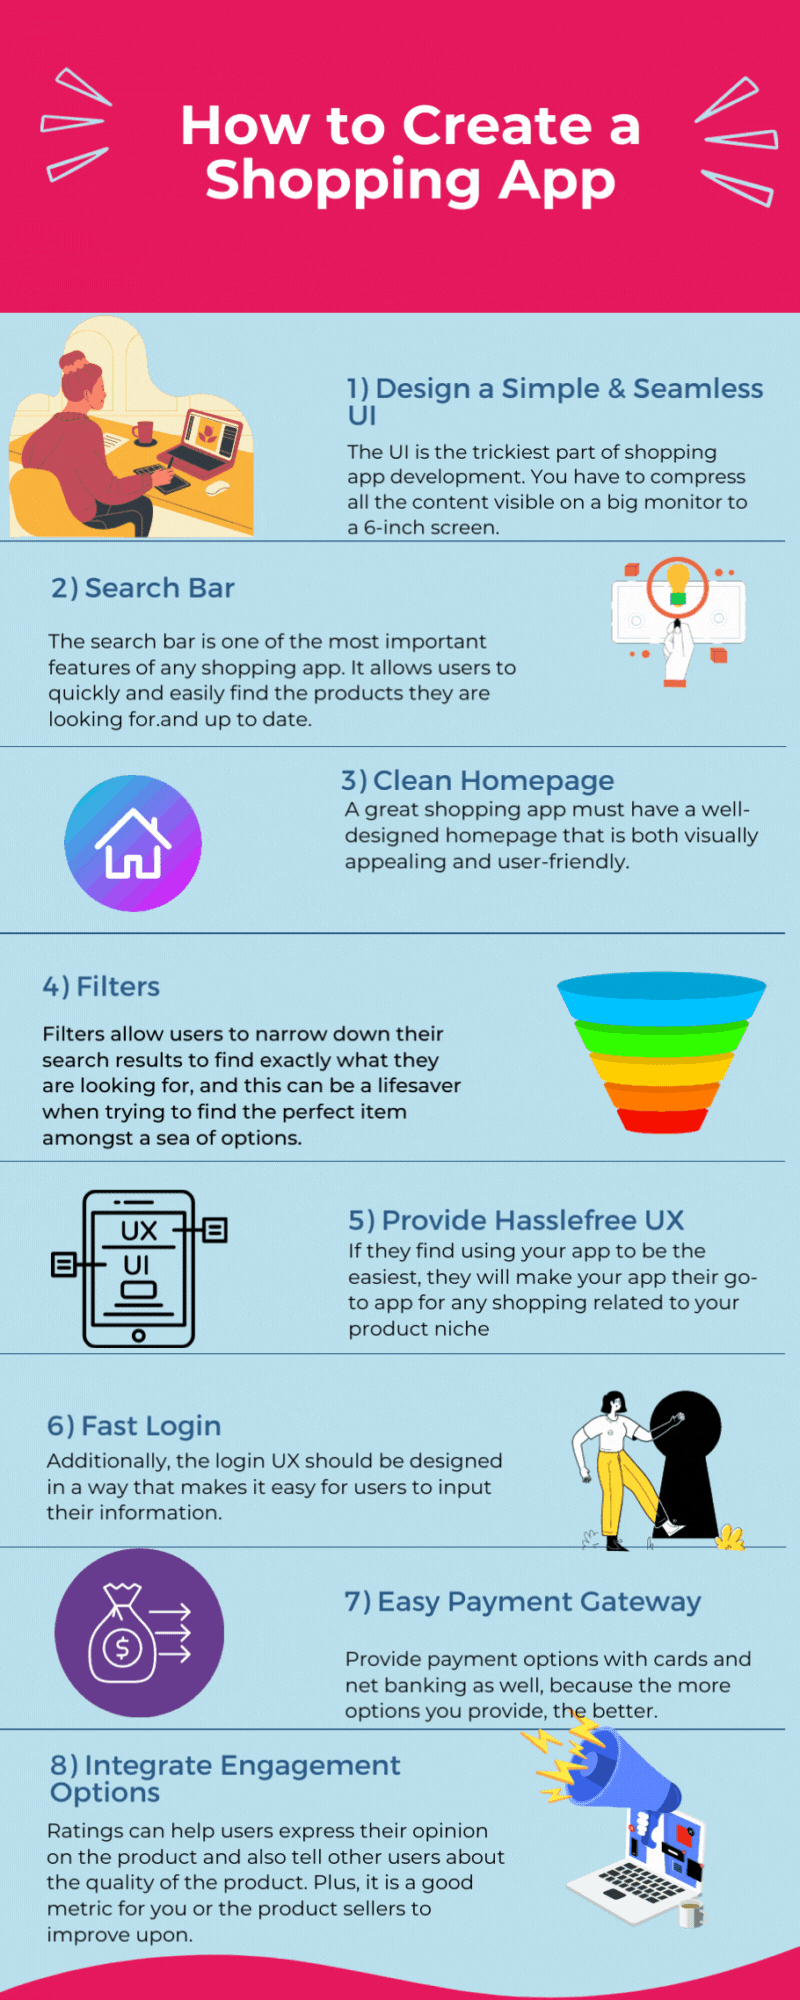 How to create a shopping app infographic